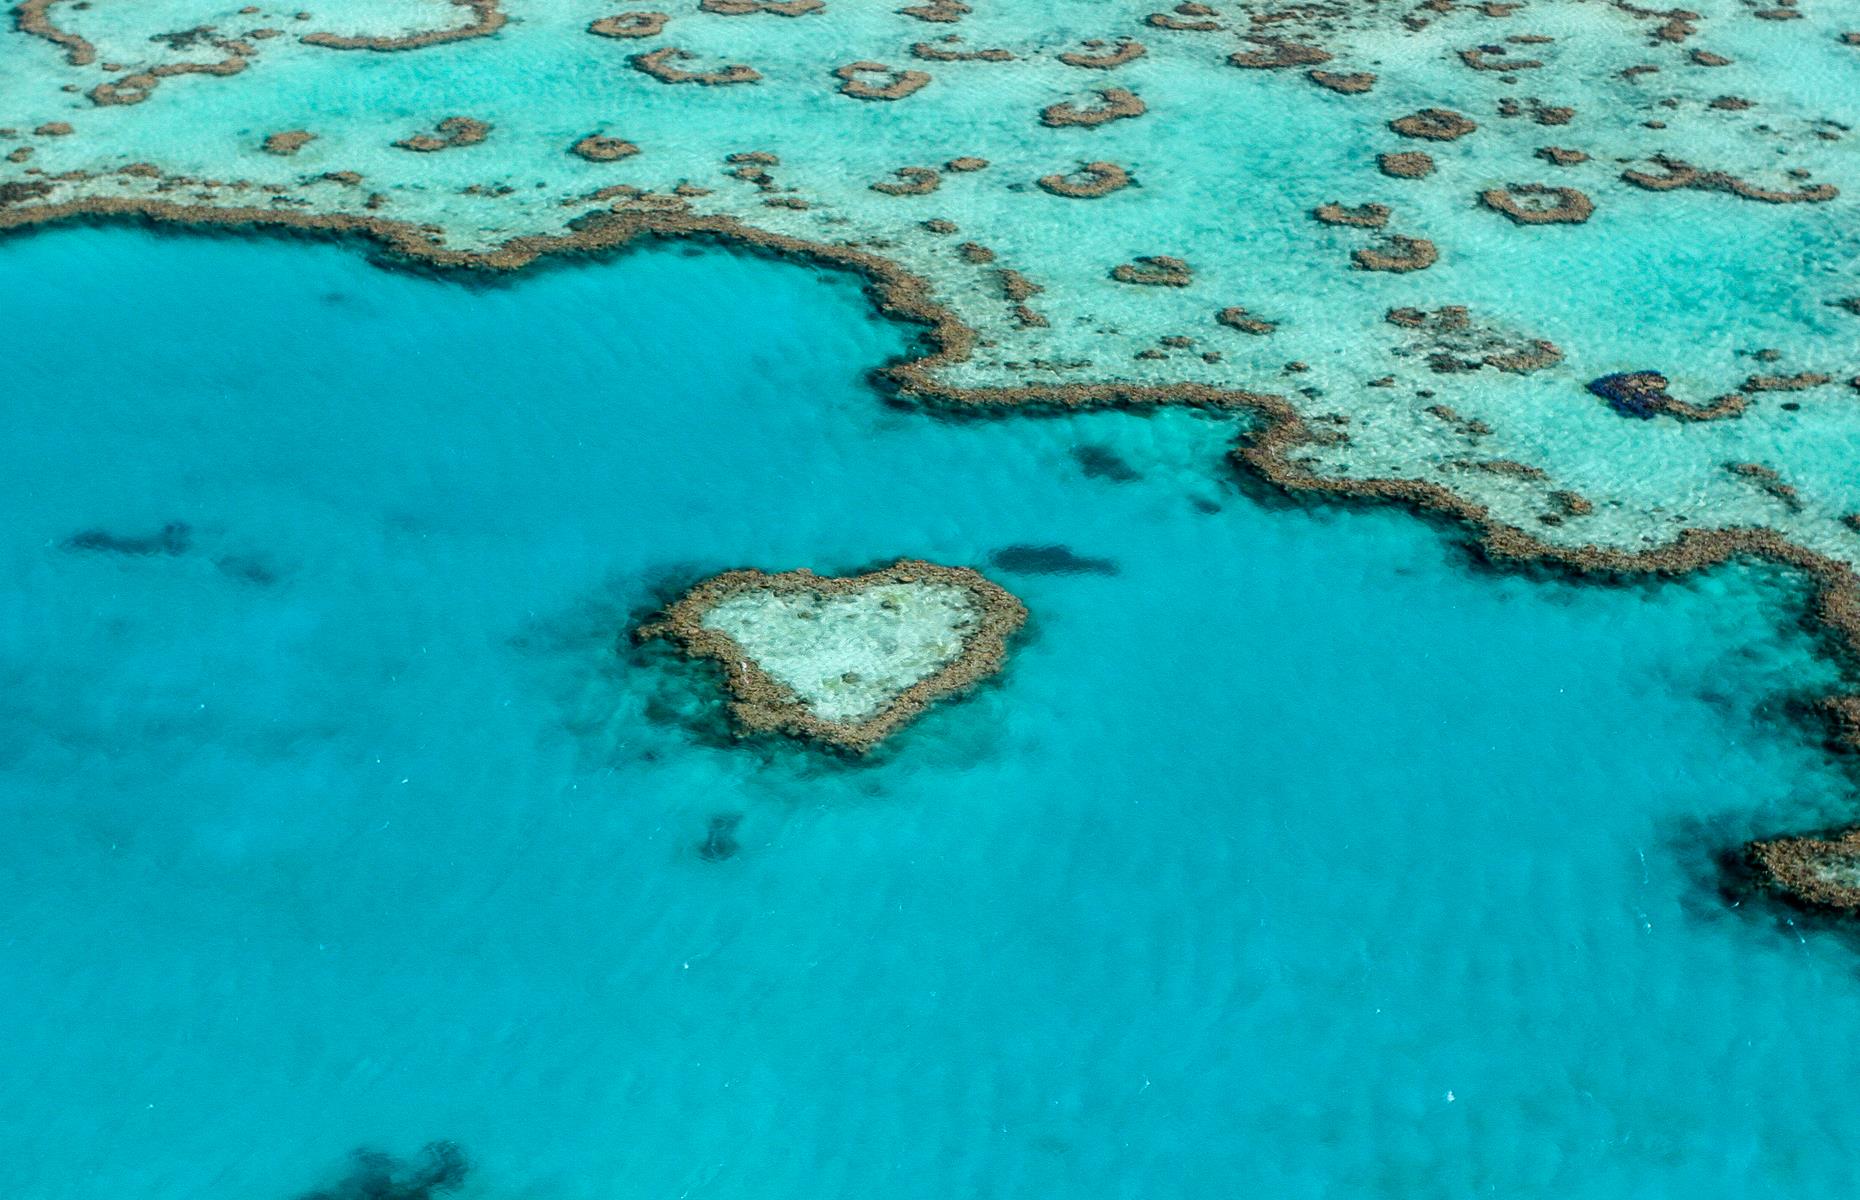 <p>This cute heart-shaped formation near the Whitsundays in the Great Barrier Reef Marine Park has become one of Australia’s most familiar landmarks, appearing in numerous tourism campaigns – but you won’t get to see it up close. Heart Reef has protected status so it’s forbidden to sail or snorkel near it. You can however circle above to admire it on a scenic flight or helicopter tour.</p>  <p><a href="https://www.loveexploring.com/galleries/92400/28-incredible-places-you-wont-believe-are-in-australia?page=1"><strong>28 incredible places you won't believe are in Australia</strong></a></p>